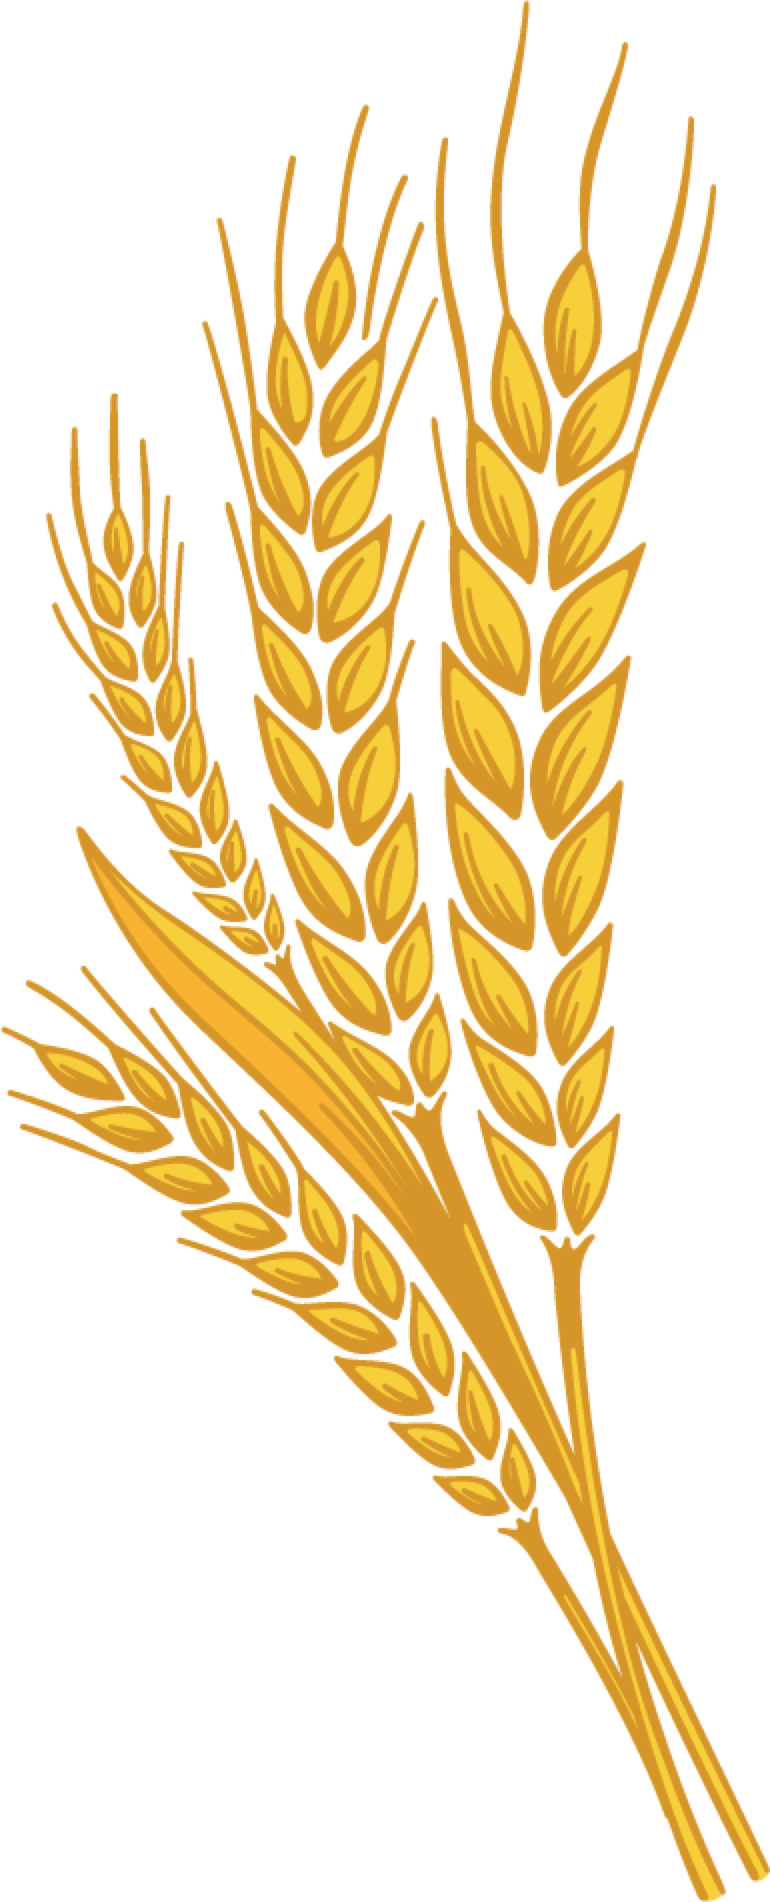 A Group Of Wheat Ears